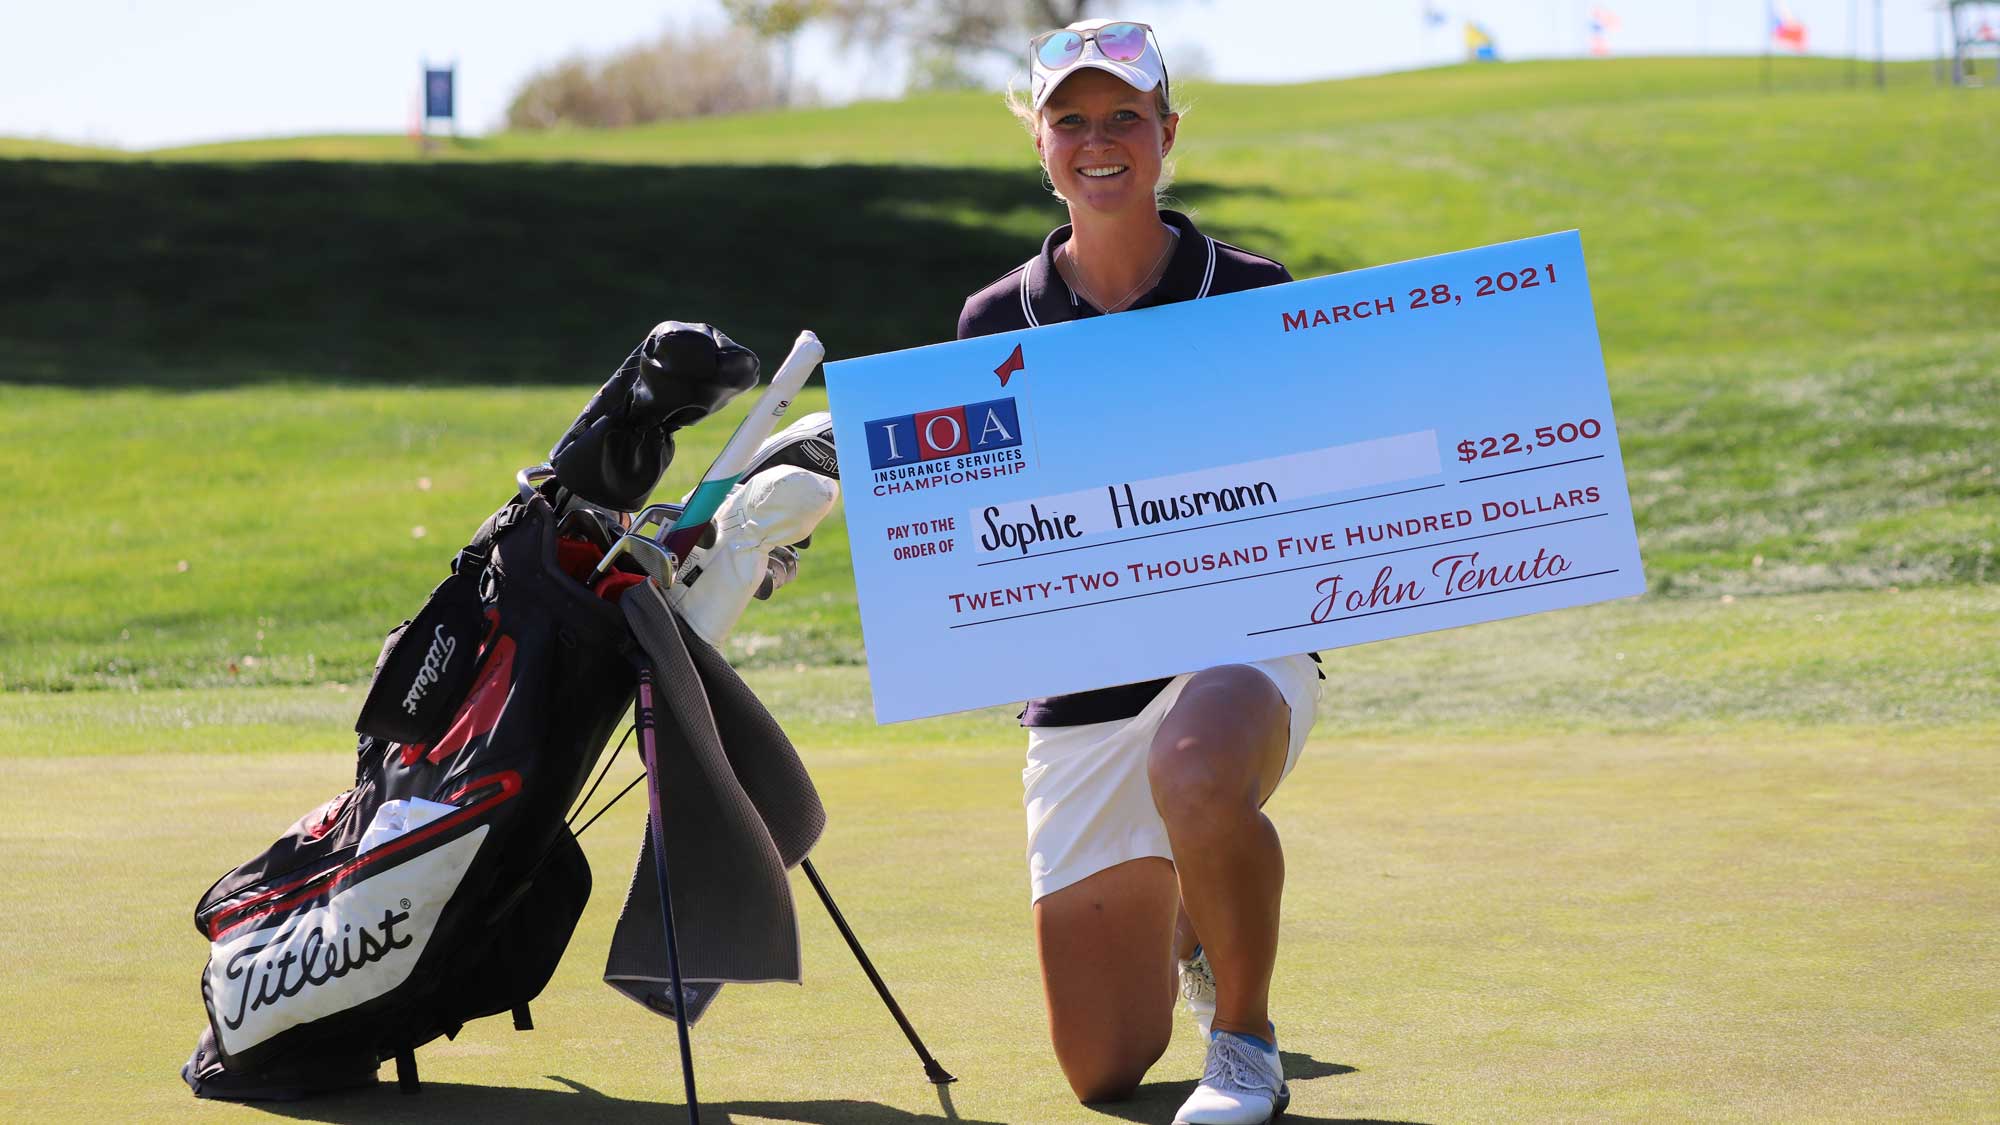 Sophie Hausmann with the winner's check at the 2021 IOA Championship